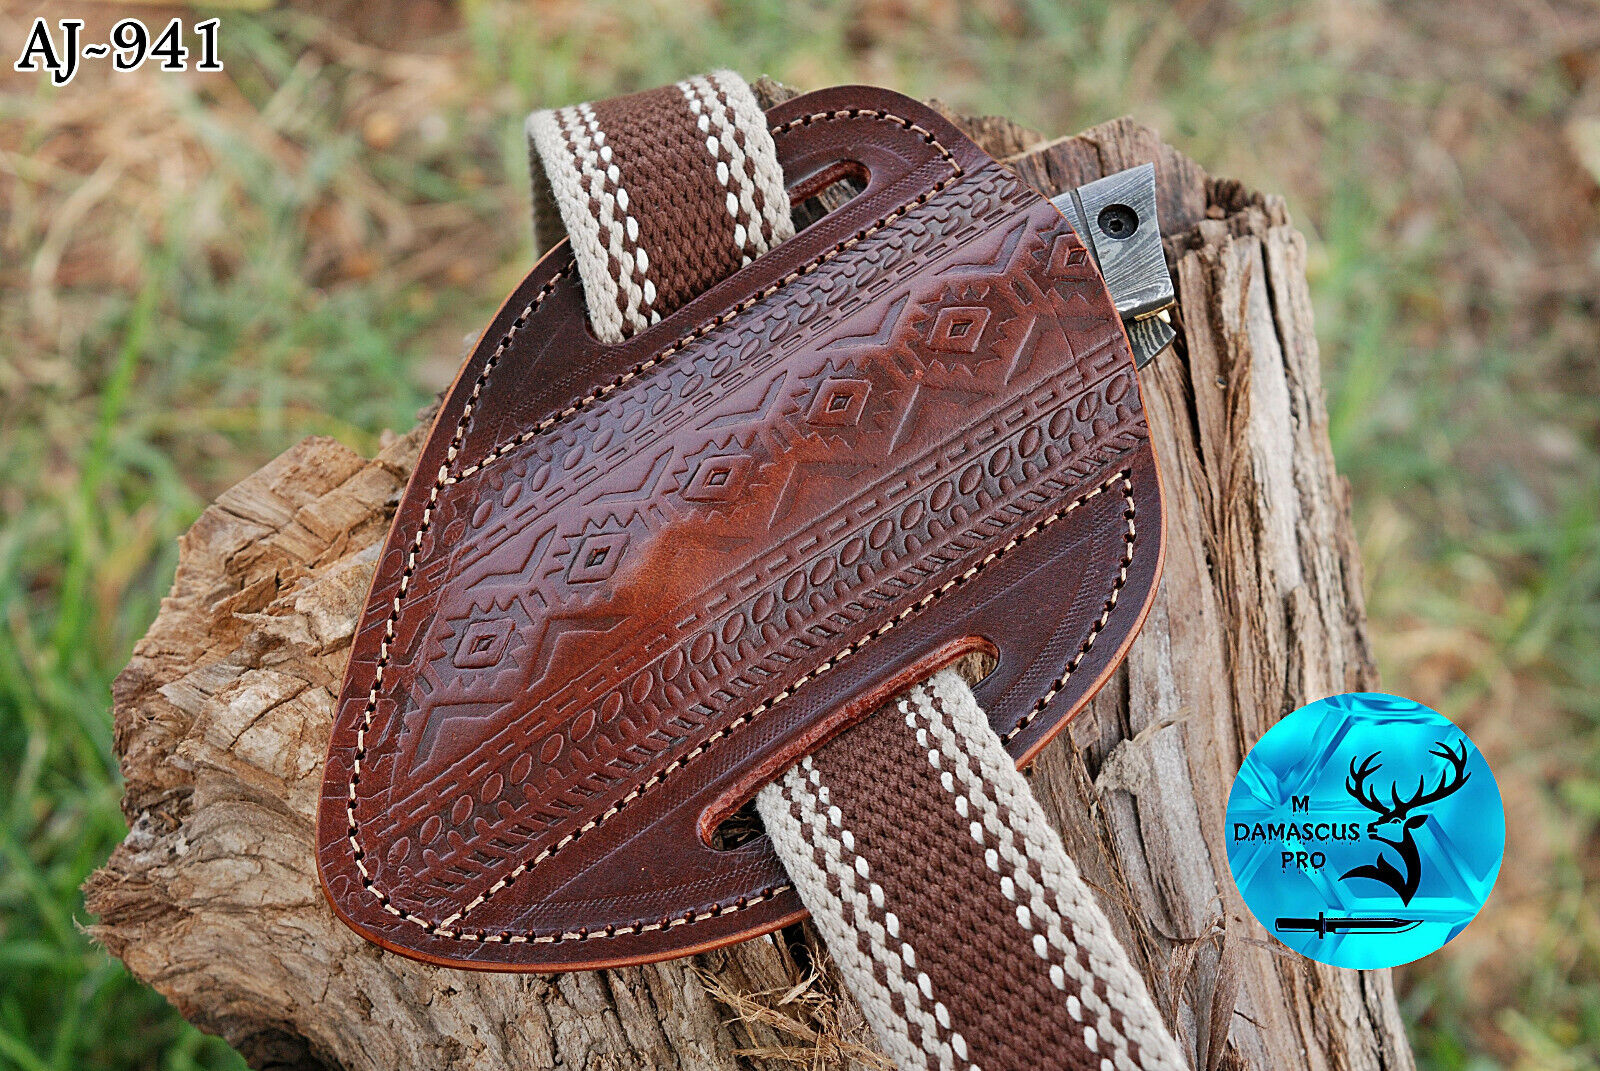 CUSTOM HANDMADE ENGRAVED PURE COW LEATHER SHEATH FOR KNIVES & OTHER TOOLS 941